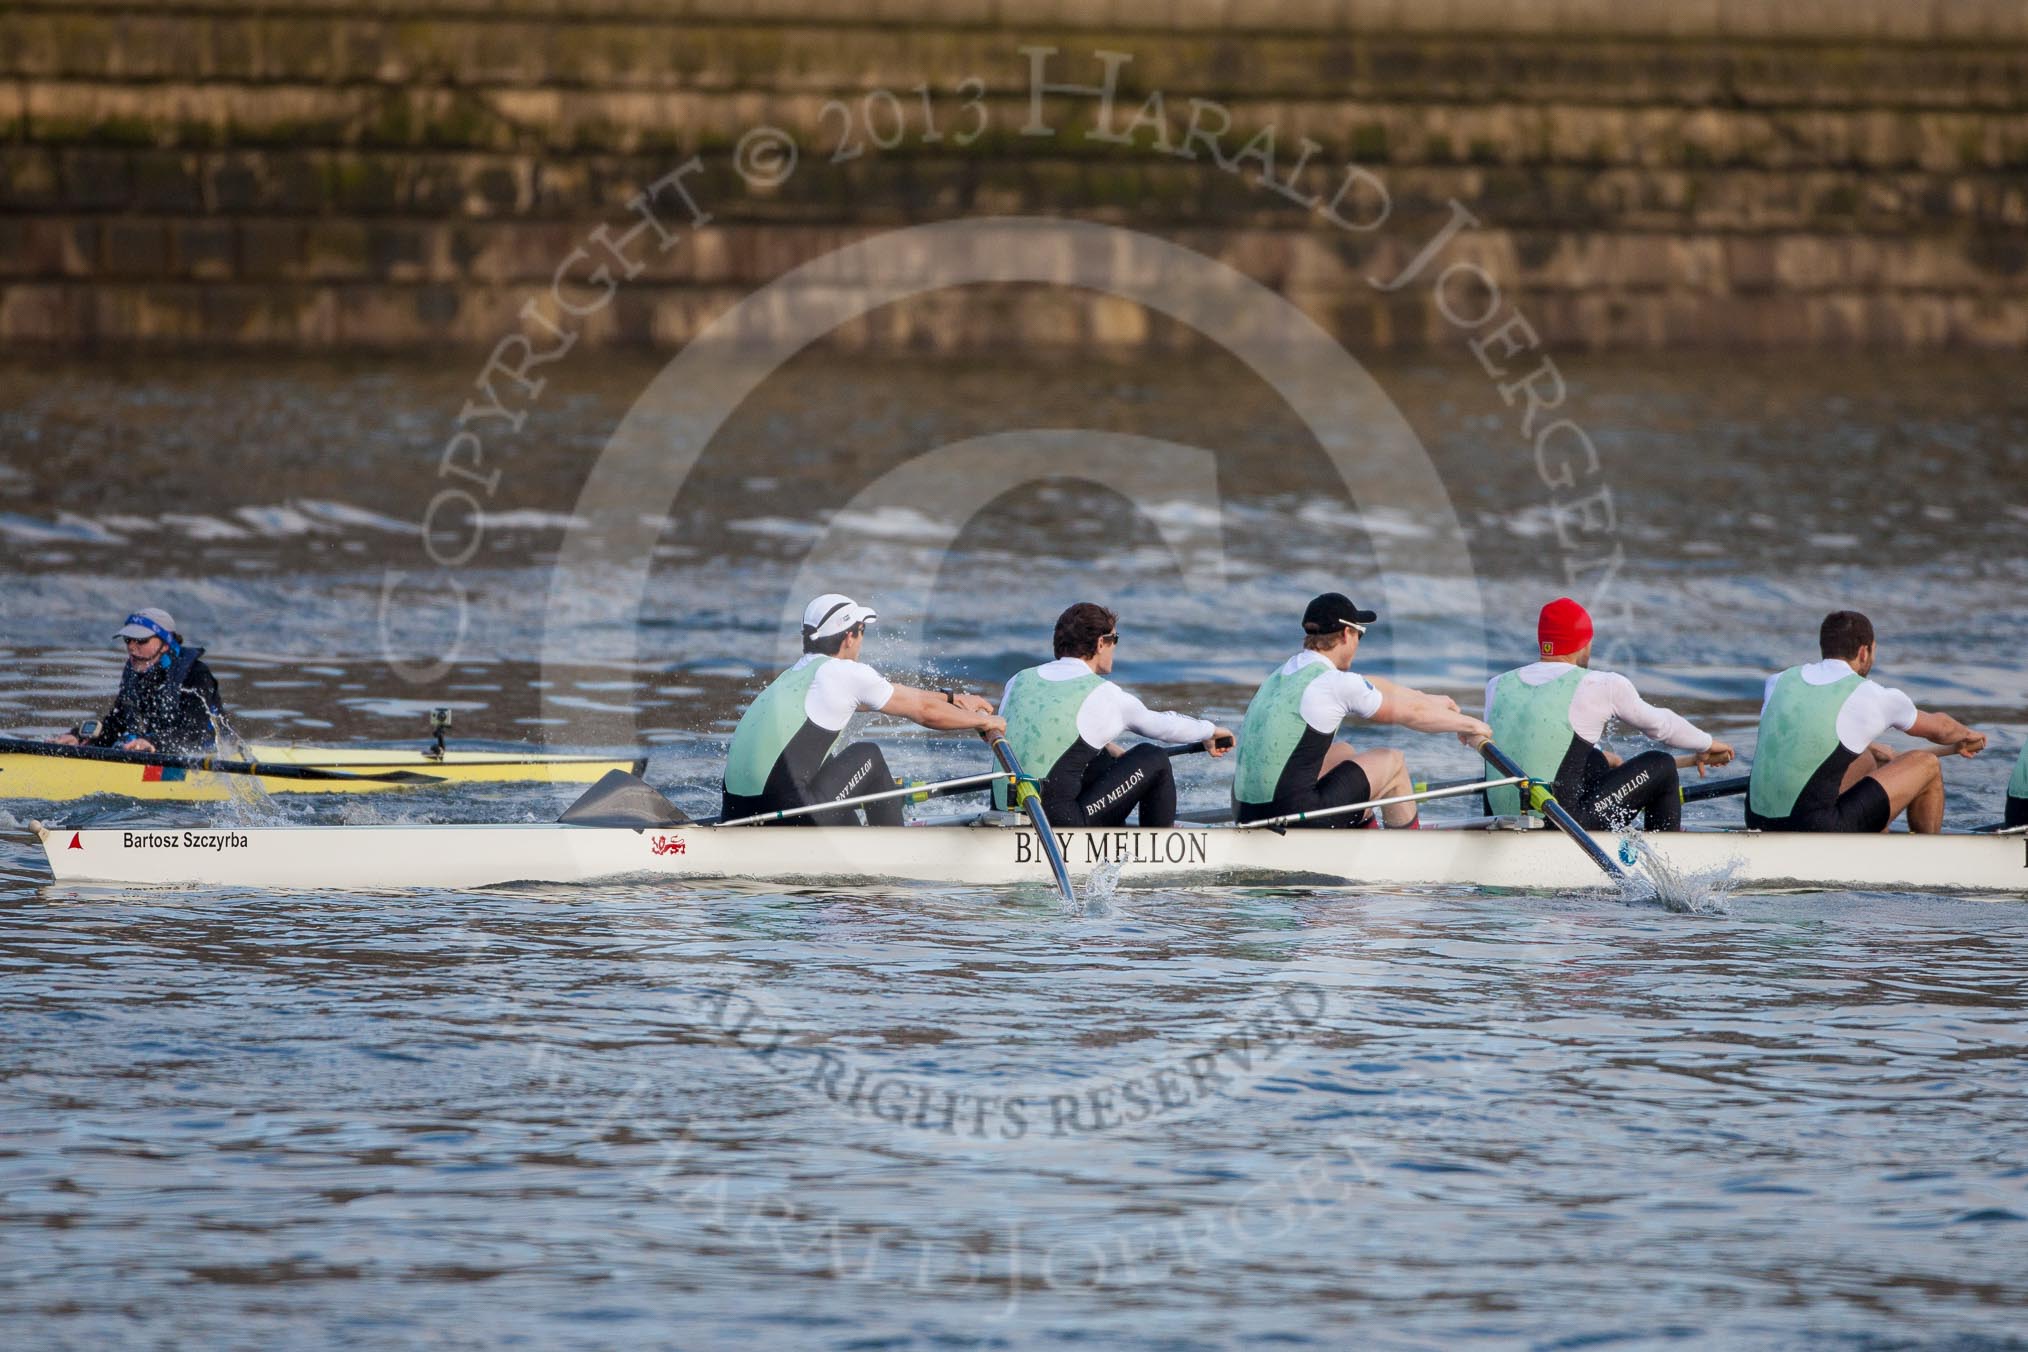 The Boat Race season 2013 - fixture CUBC vs Leander: The Goldie vs Imperial BC fixture..
River Thames Tideway between Putney Bridge and Mortlake,
London SW15,

United Kingdom,
on 02 March 2013 at 15:23, image #32